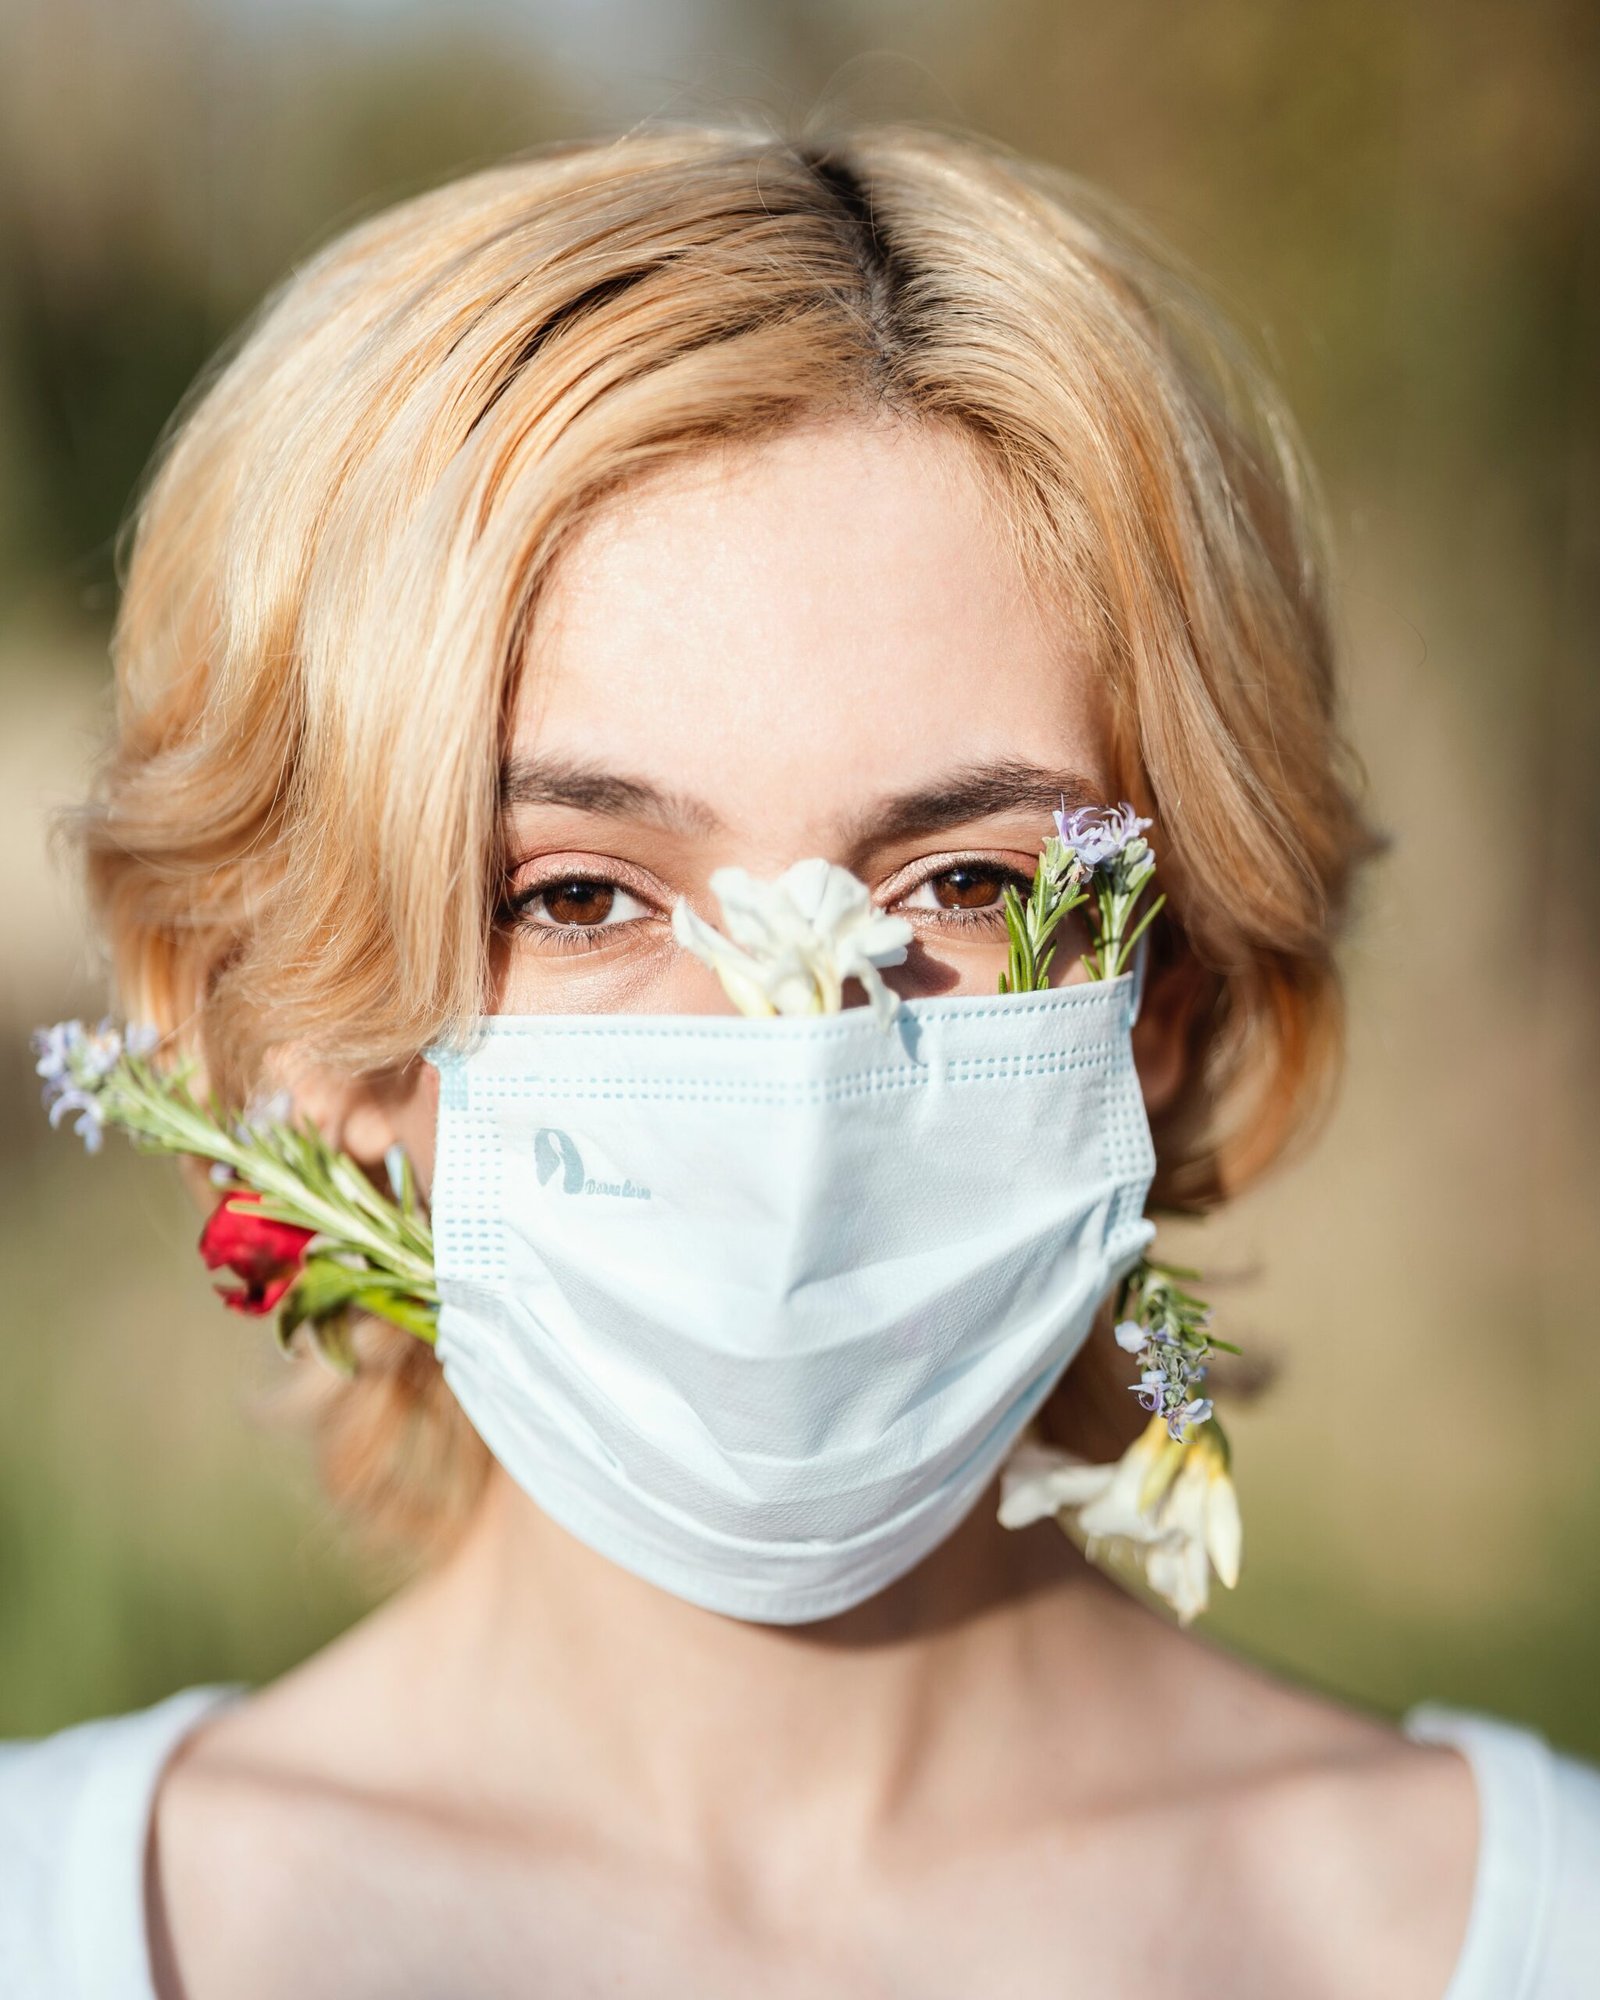 a woman wearing a face mask and flowers in her hair